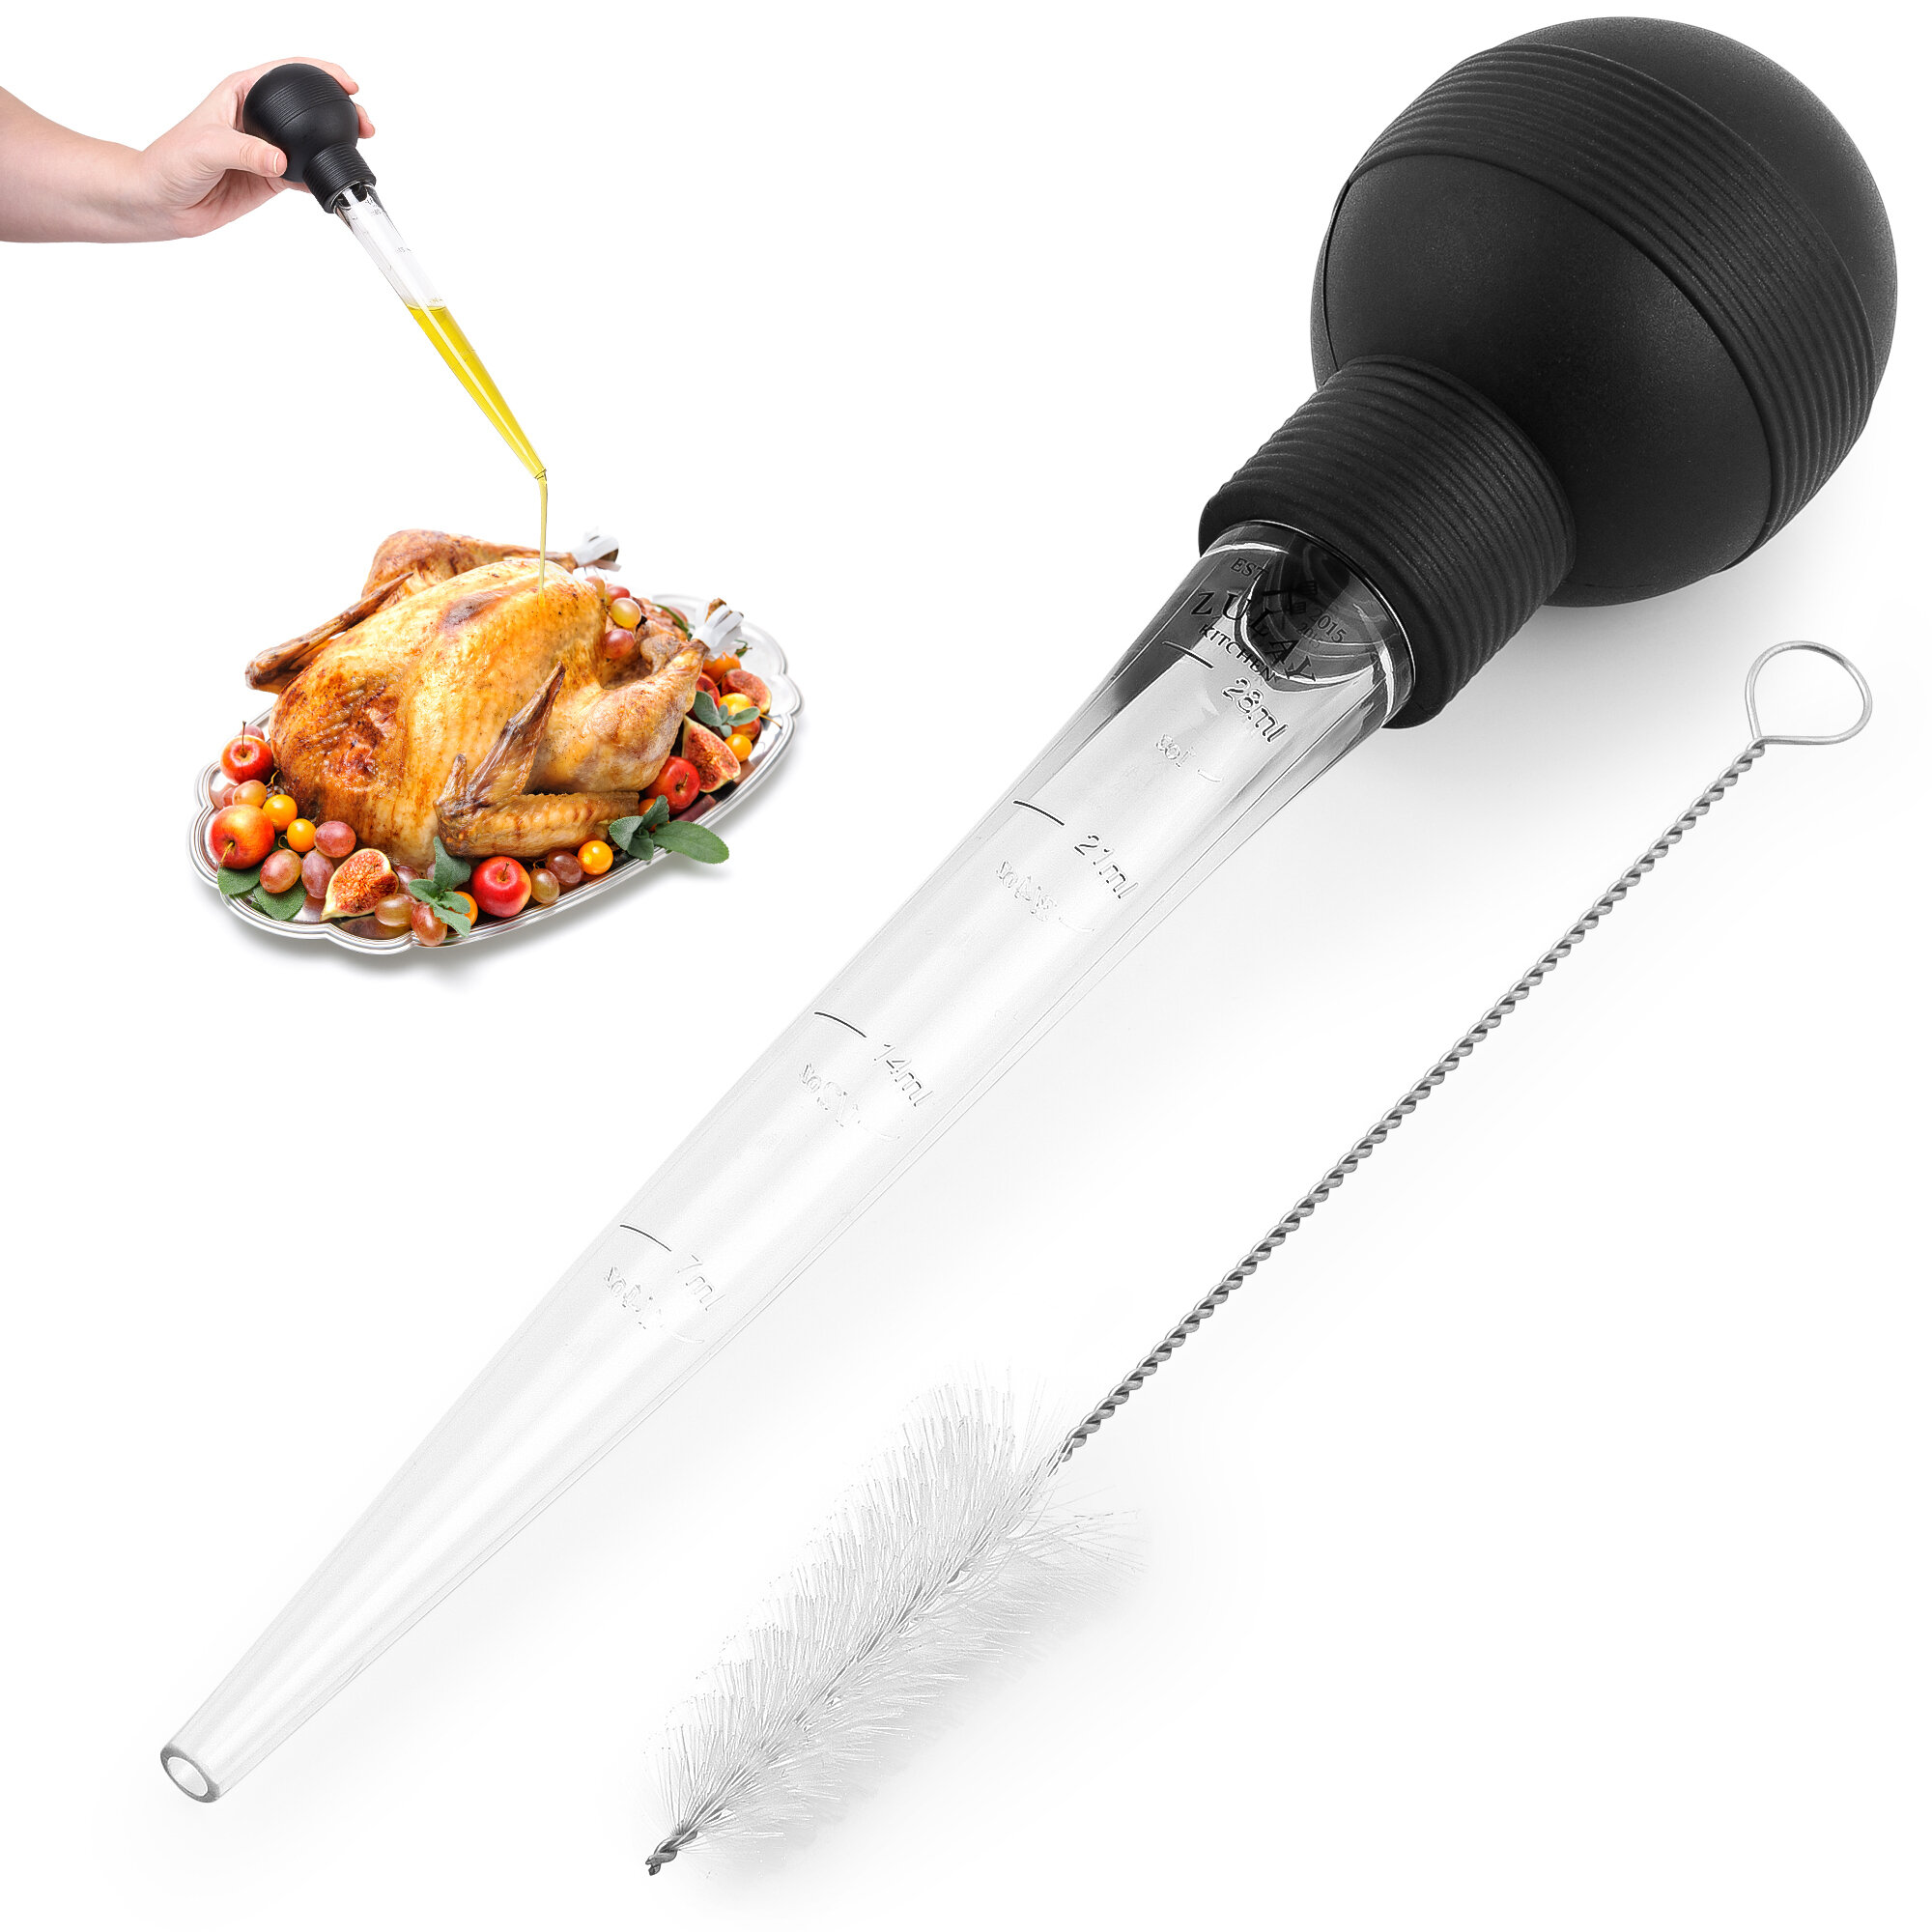 Turkey Baster Syringe Barbecue Basting Brush and Cleaning Brush for cooking BBQ and Grilling 